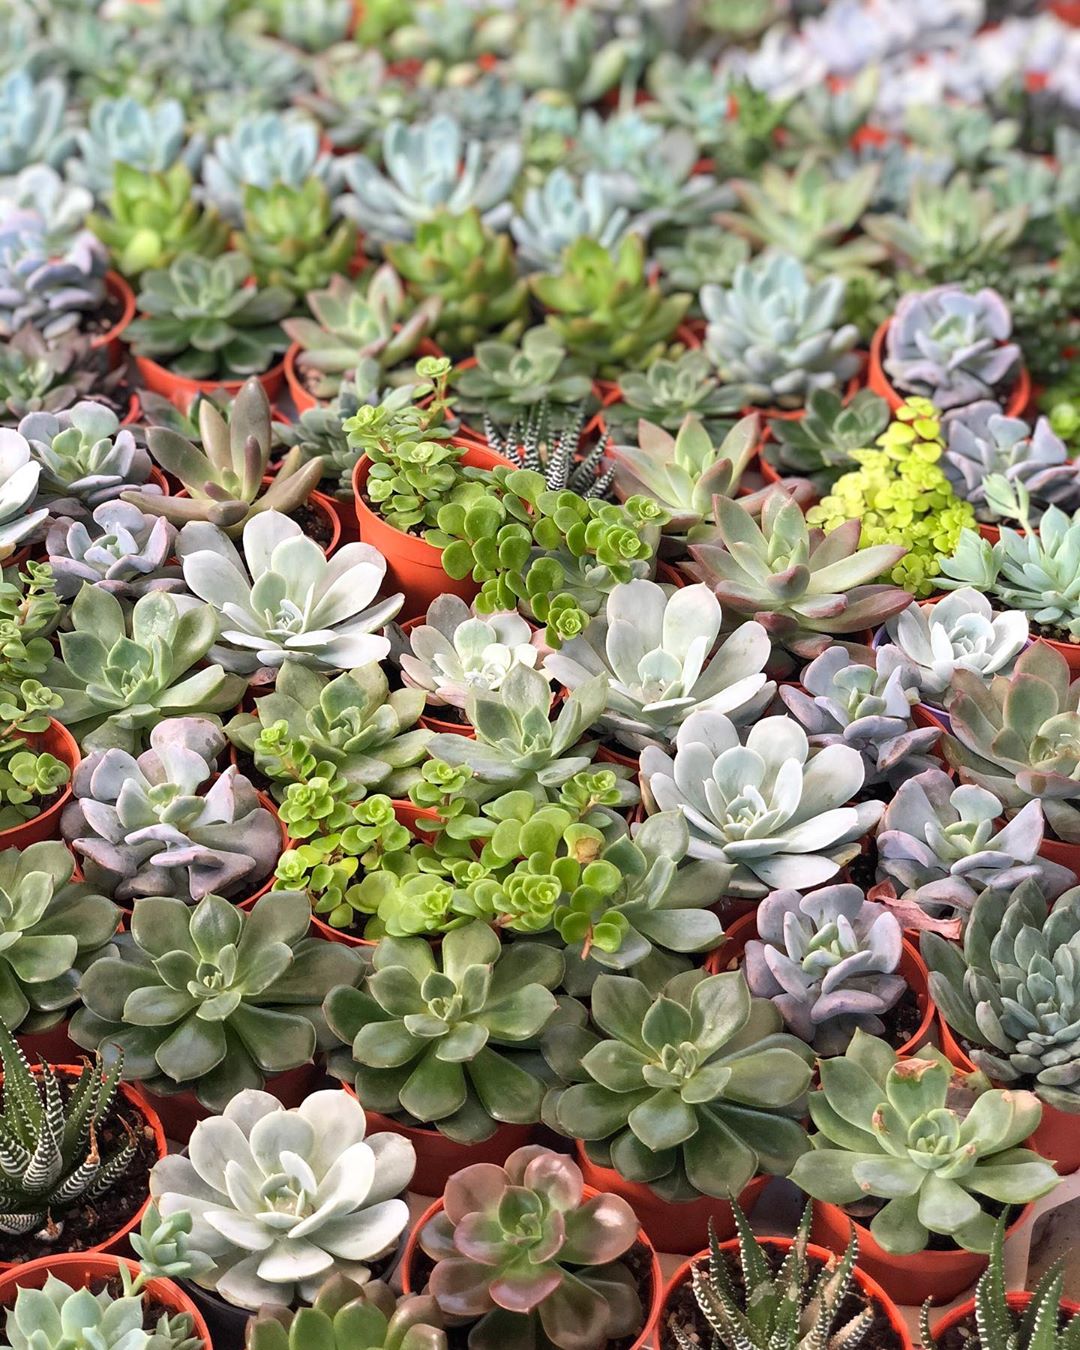 20 Plant Nurseries In Singapore For All Your Gardening Needs ...